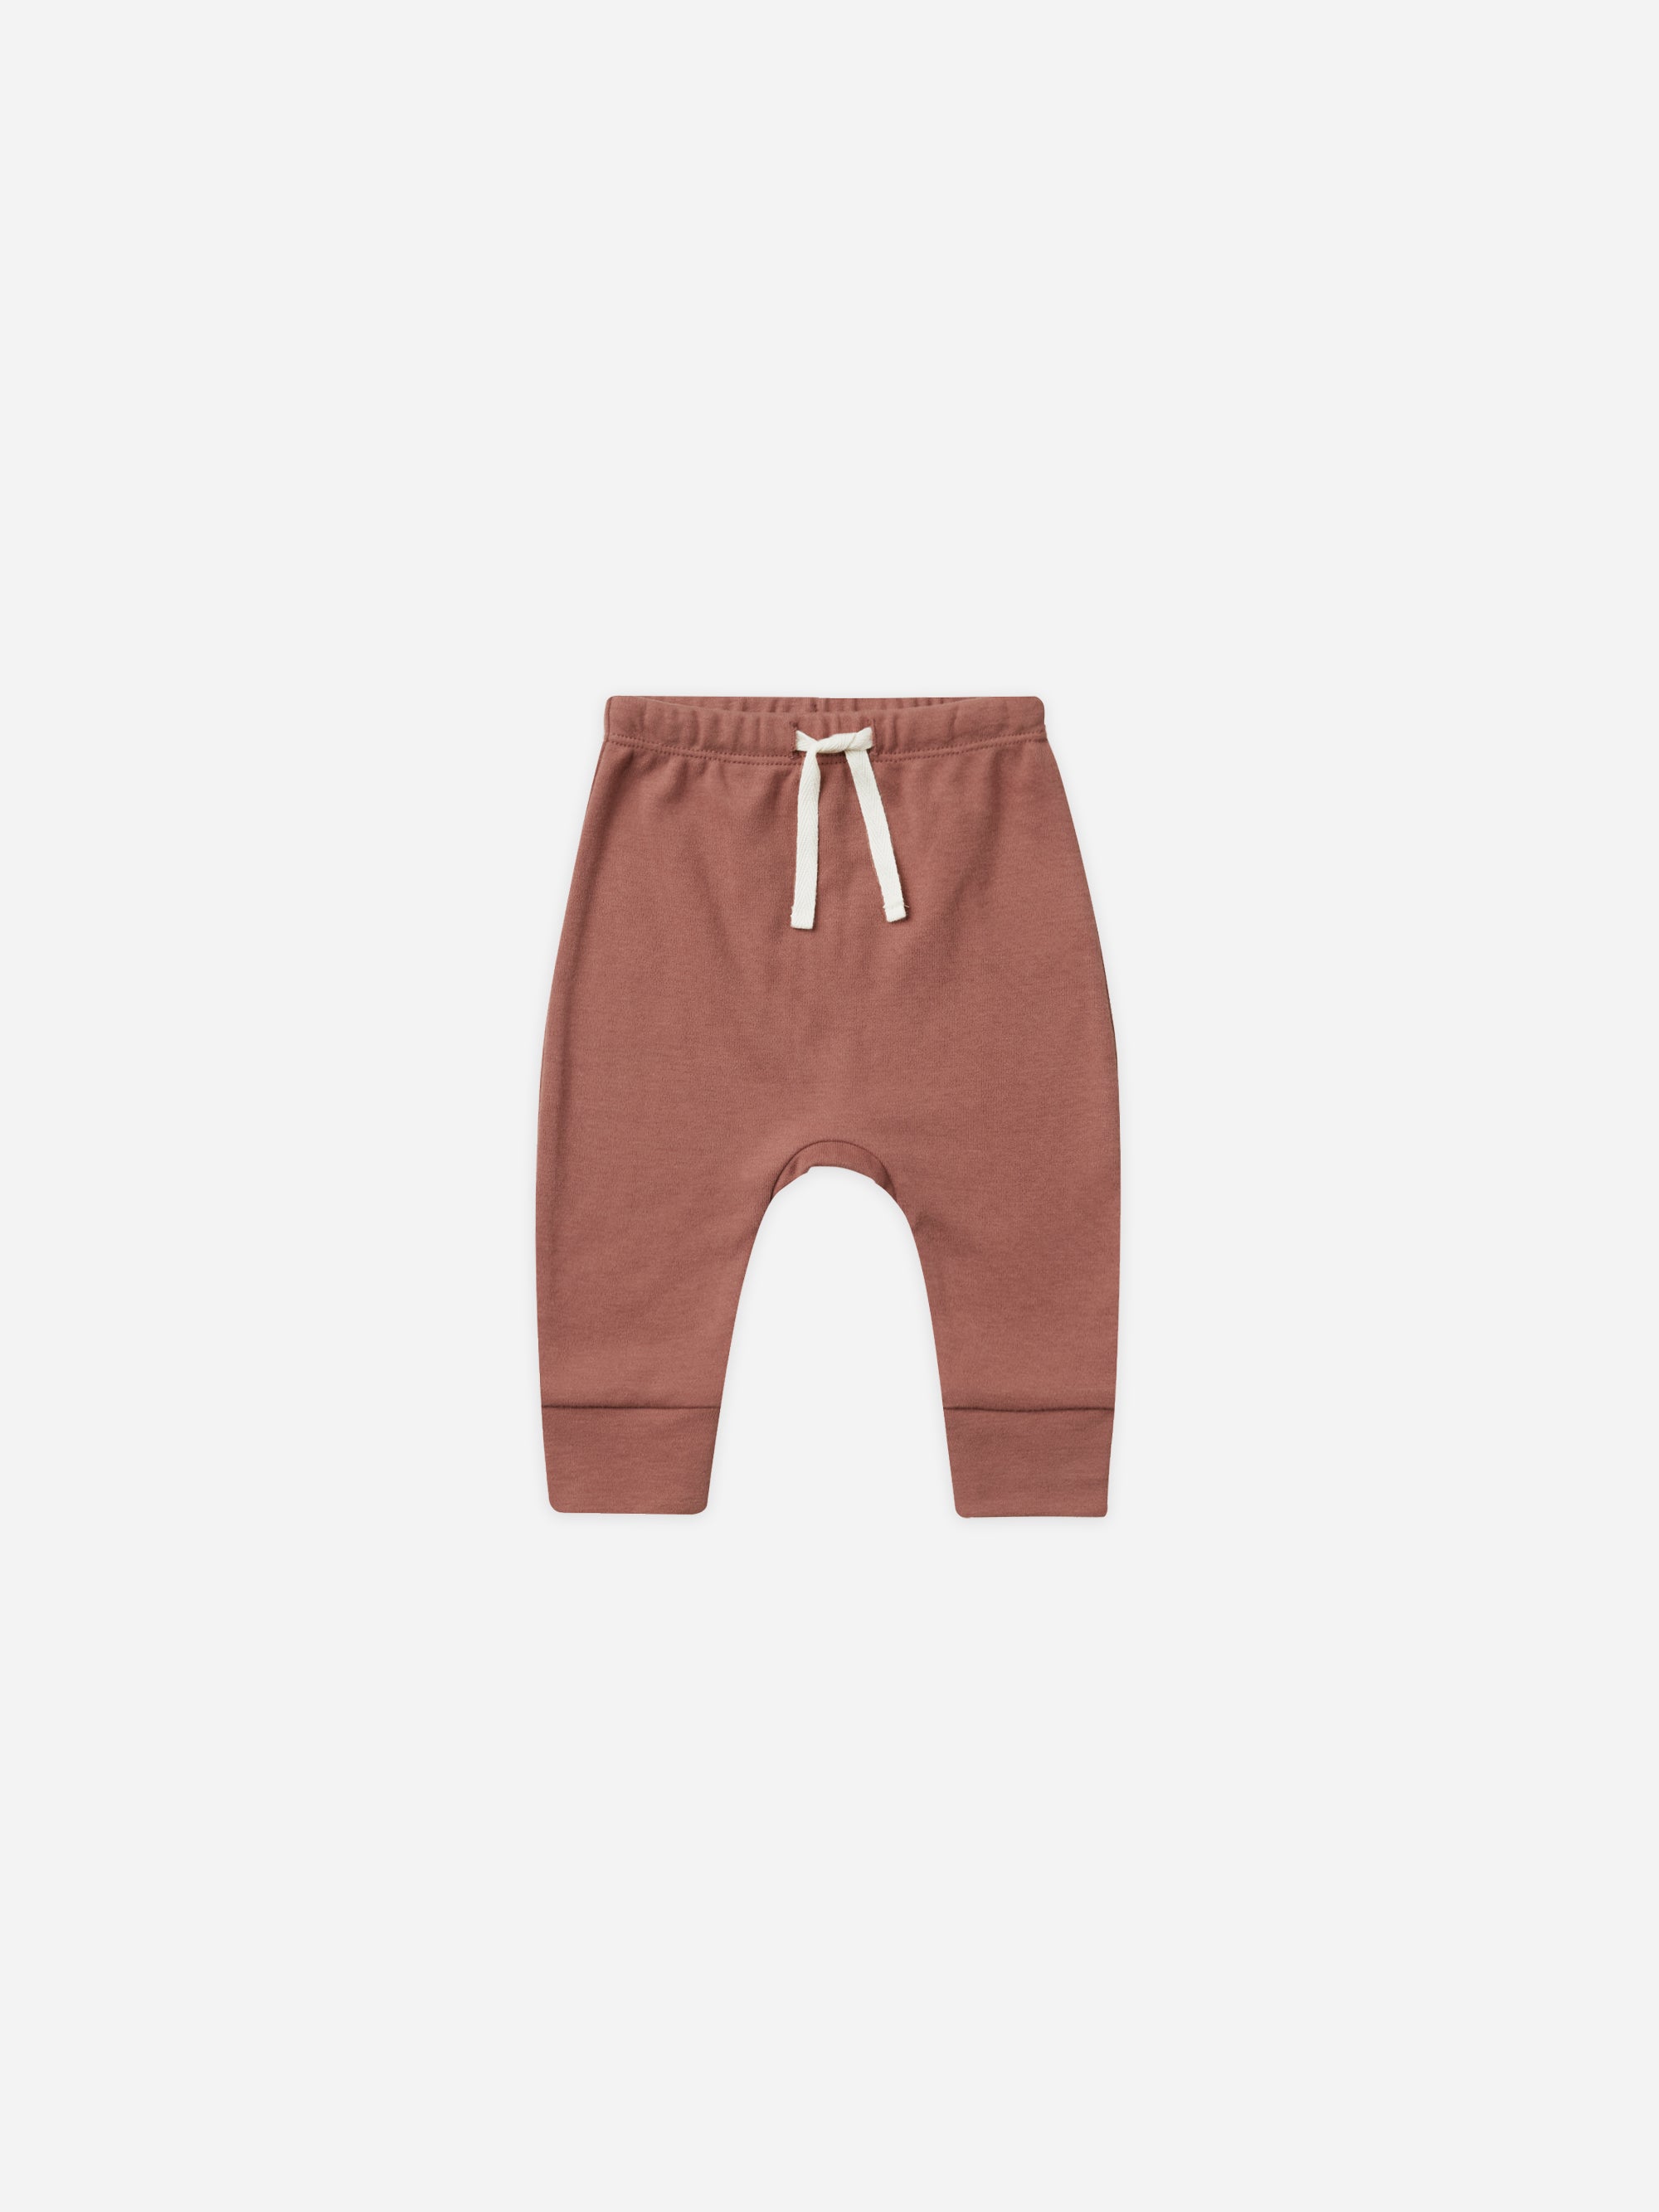 Drawstring Pant || Berry - Rylee + Cru | Kids Clothes | Trendy Baby Clothes | Modern Infant Outfits |